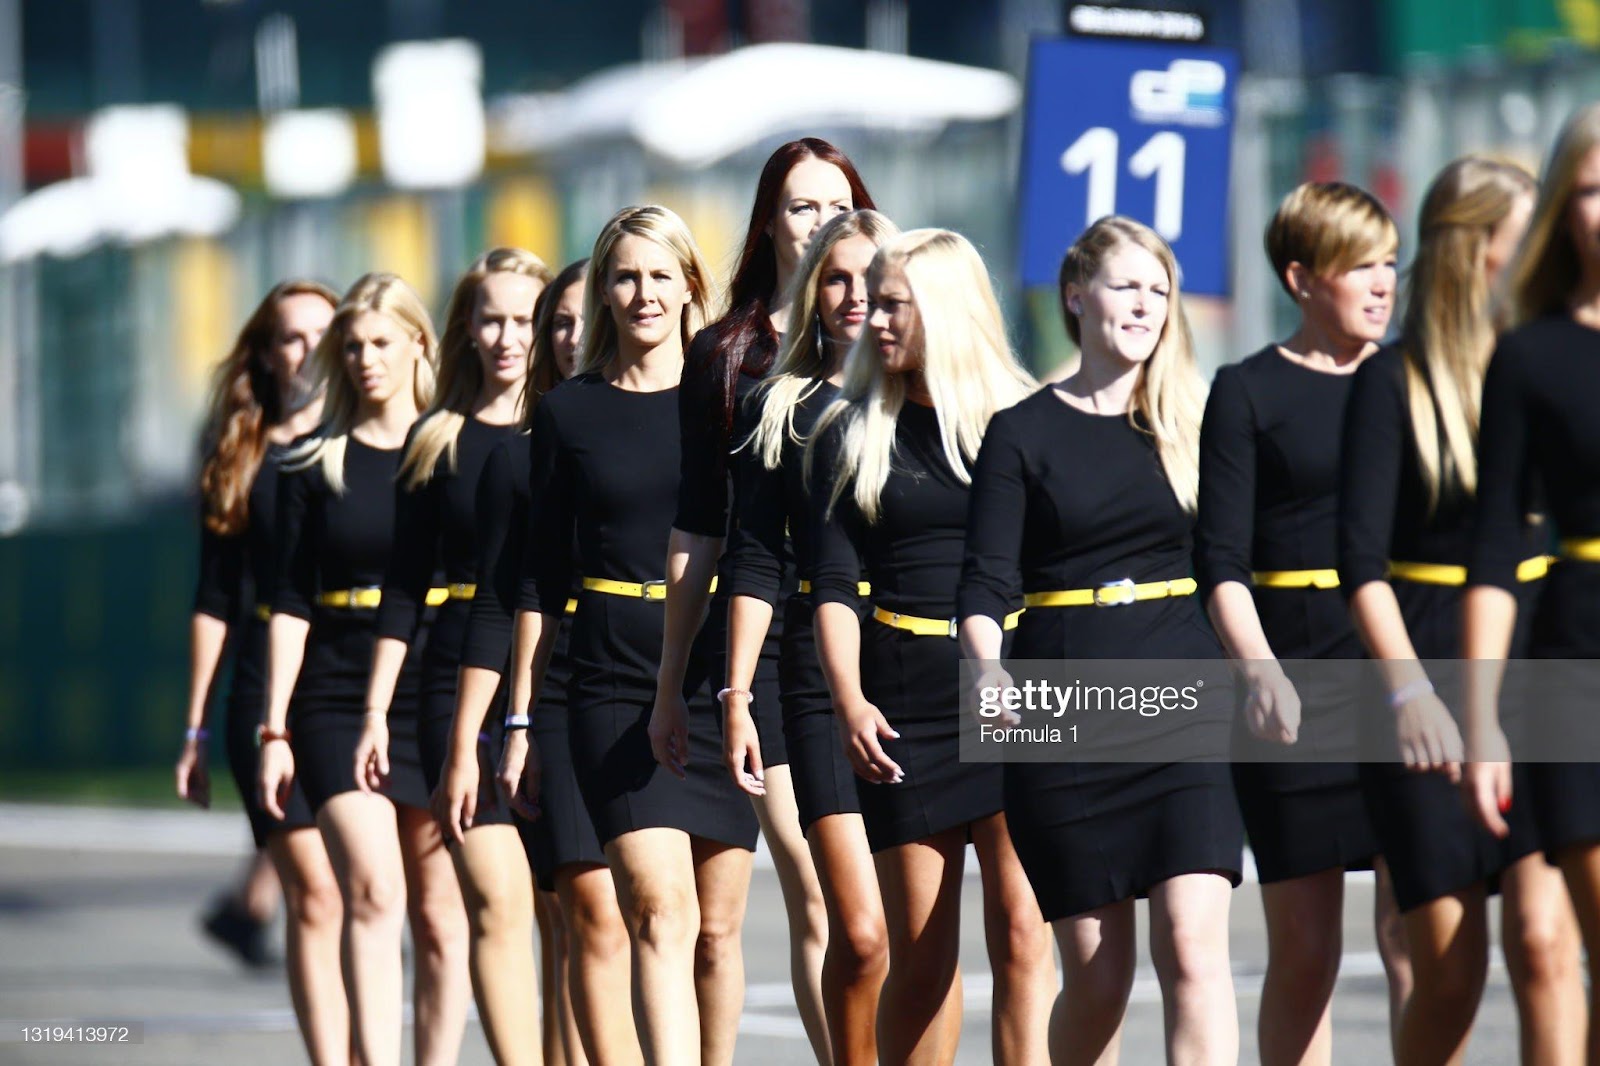 D:\Documenti\posts\posts\Women and motorsport\foto\Getty e altre\Spa\series-round-6-spafrancorchamps-spa-belgiumsunday-28-august-2016grid-picture-id1319413972.jpg